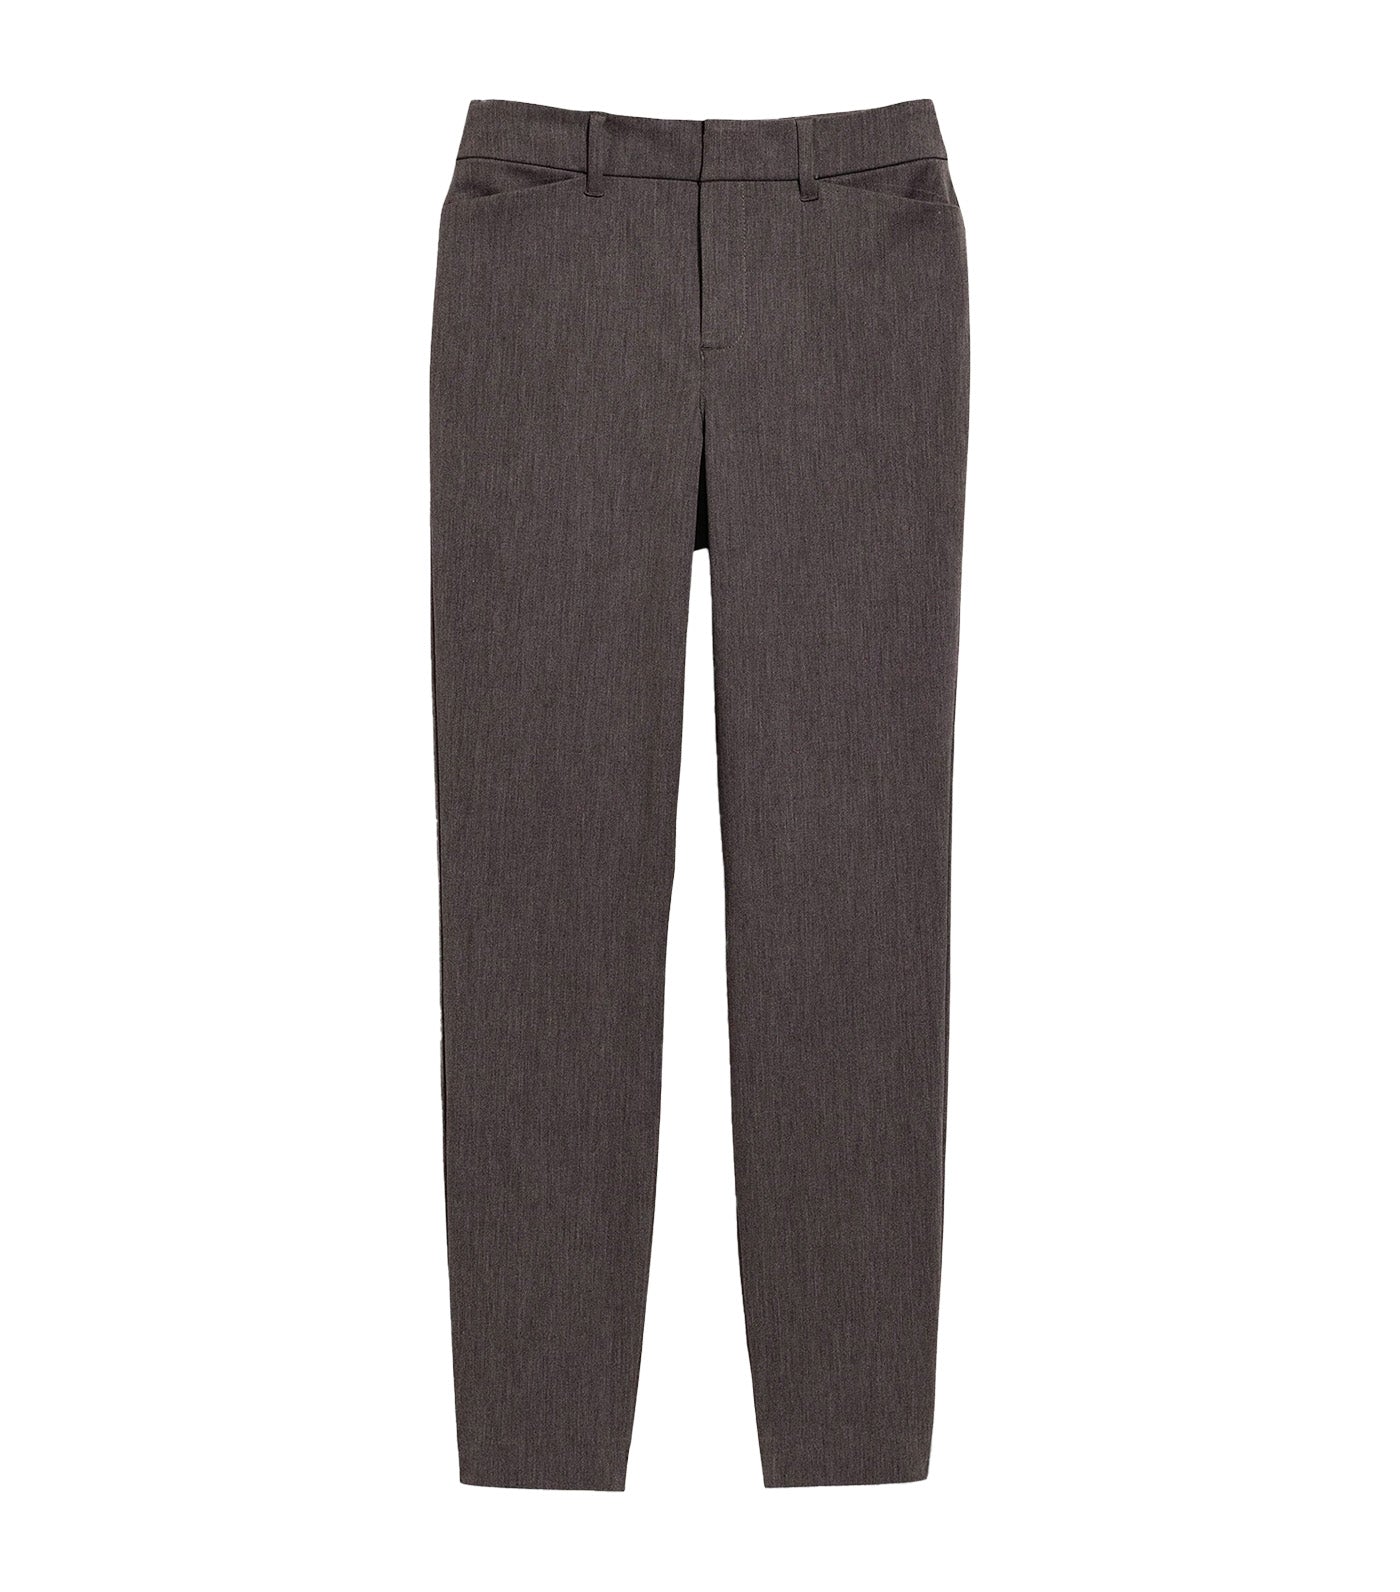 High-Waisted Pixie Skinny Ankle Pants for Women Dark Heather Gray